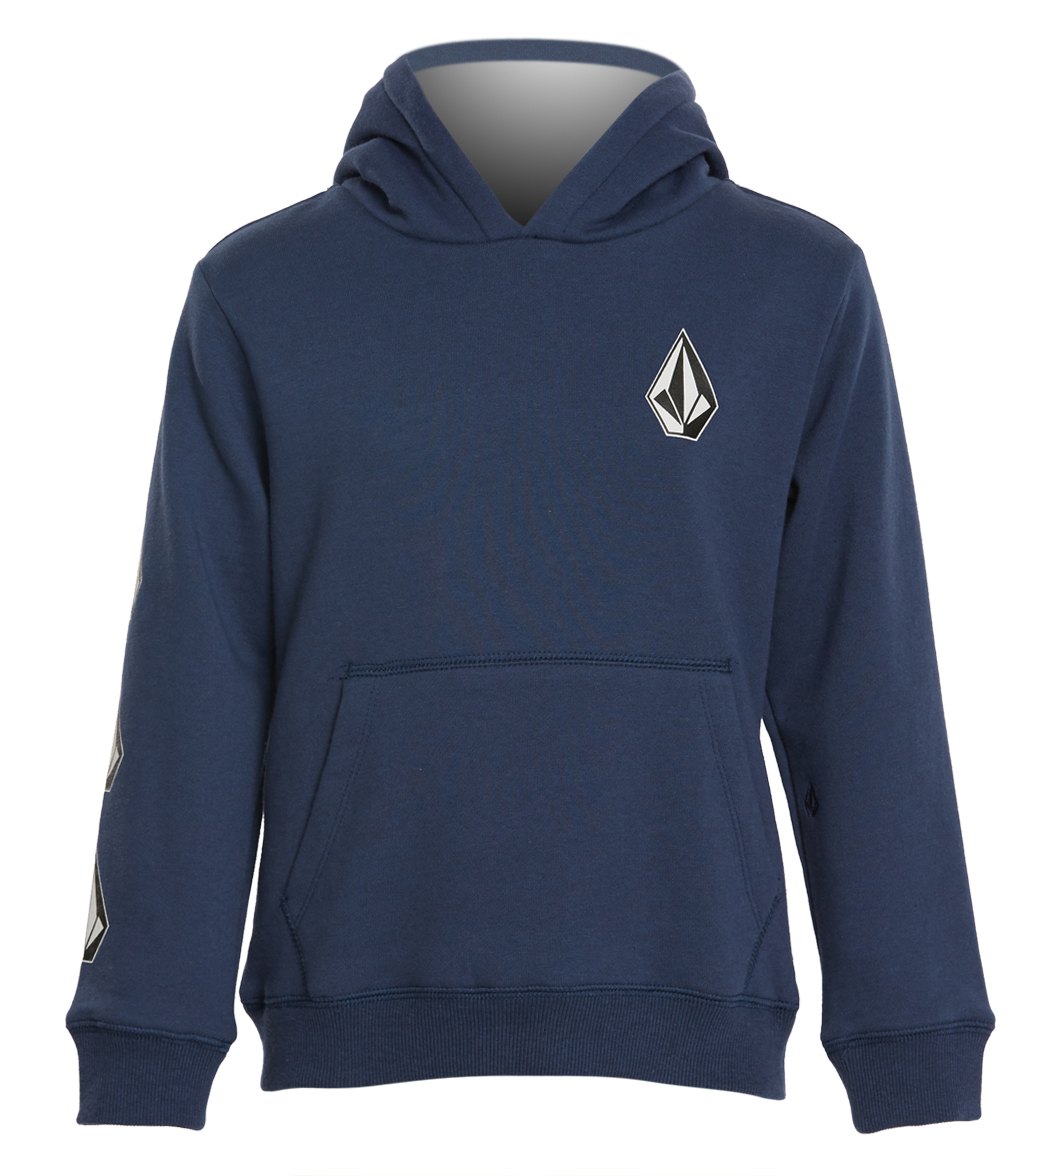 Volcom Boys' Deadly Stones Hoodie - Matured Blue 2T Cotton/Polyester - Swimoutlet.com